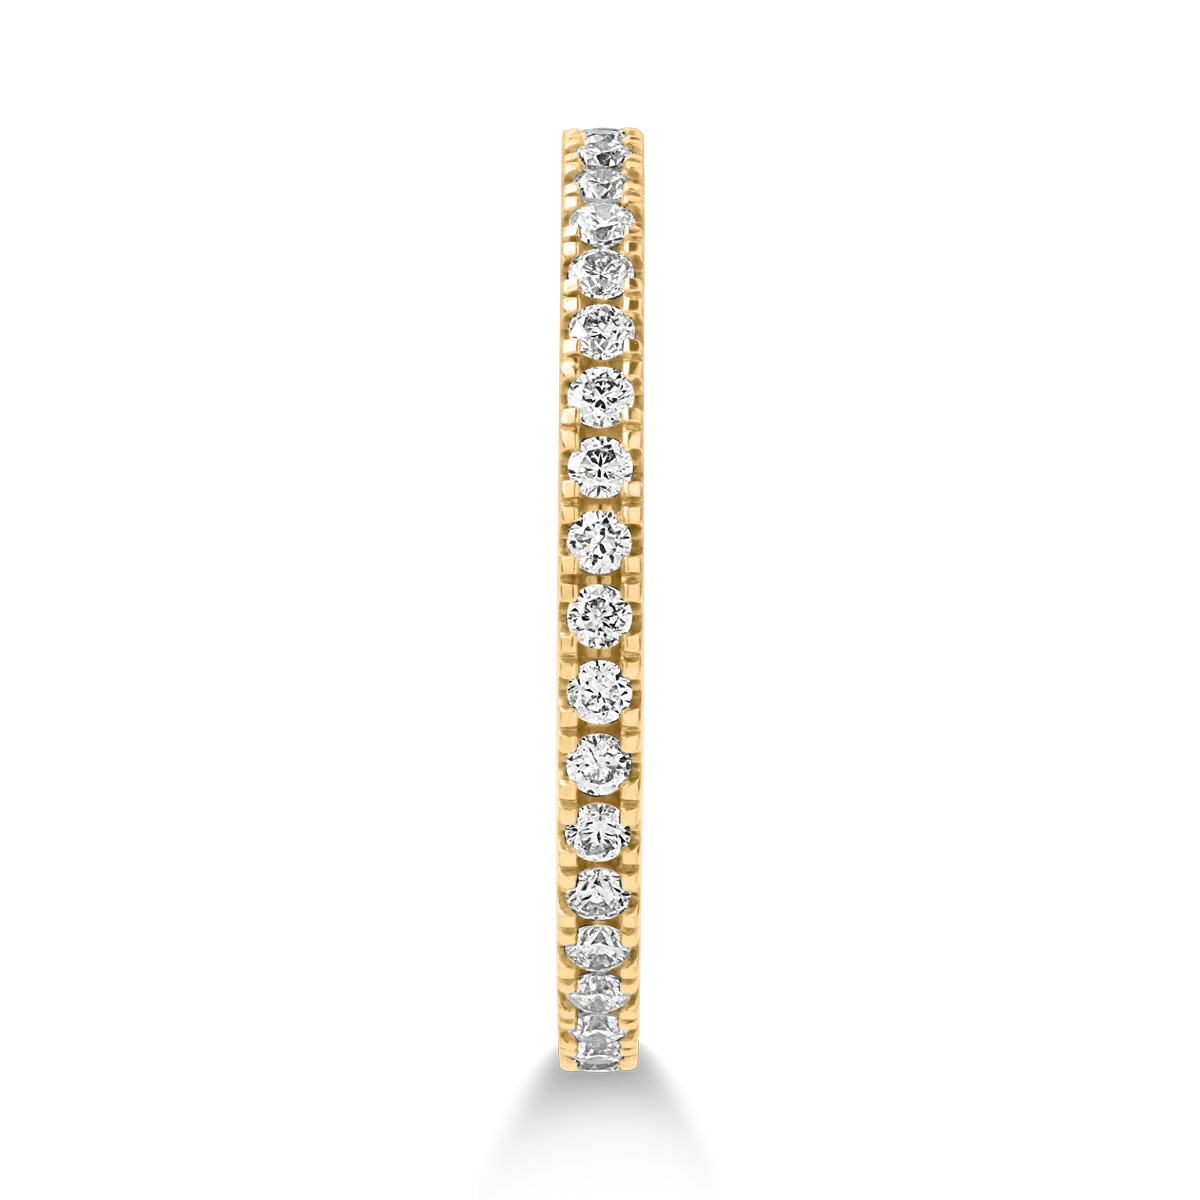 Eternity ring in yellow gold with 0.33ct diamonds